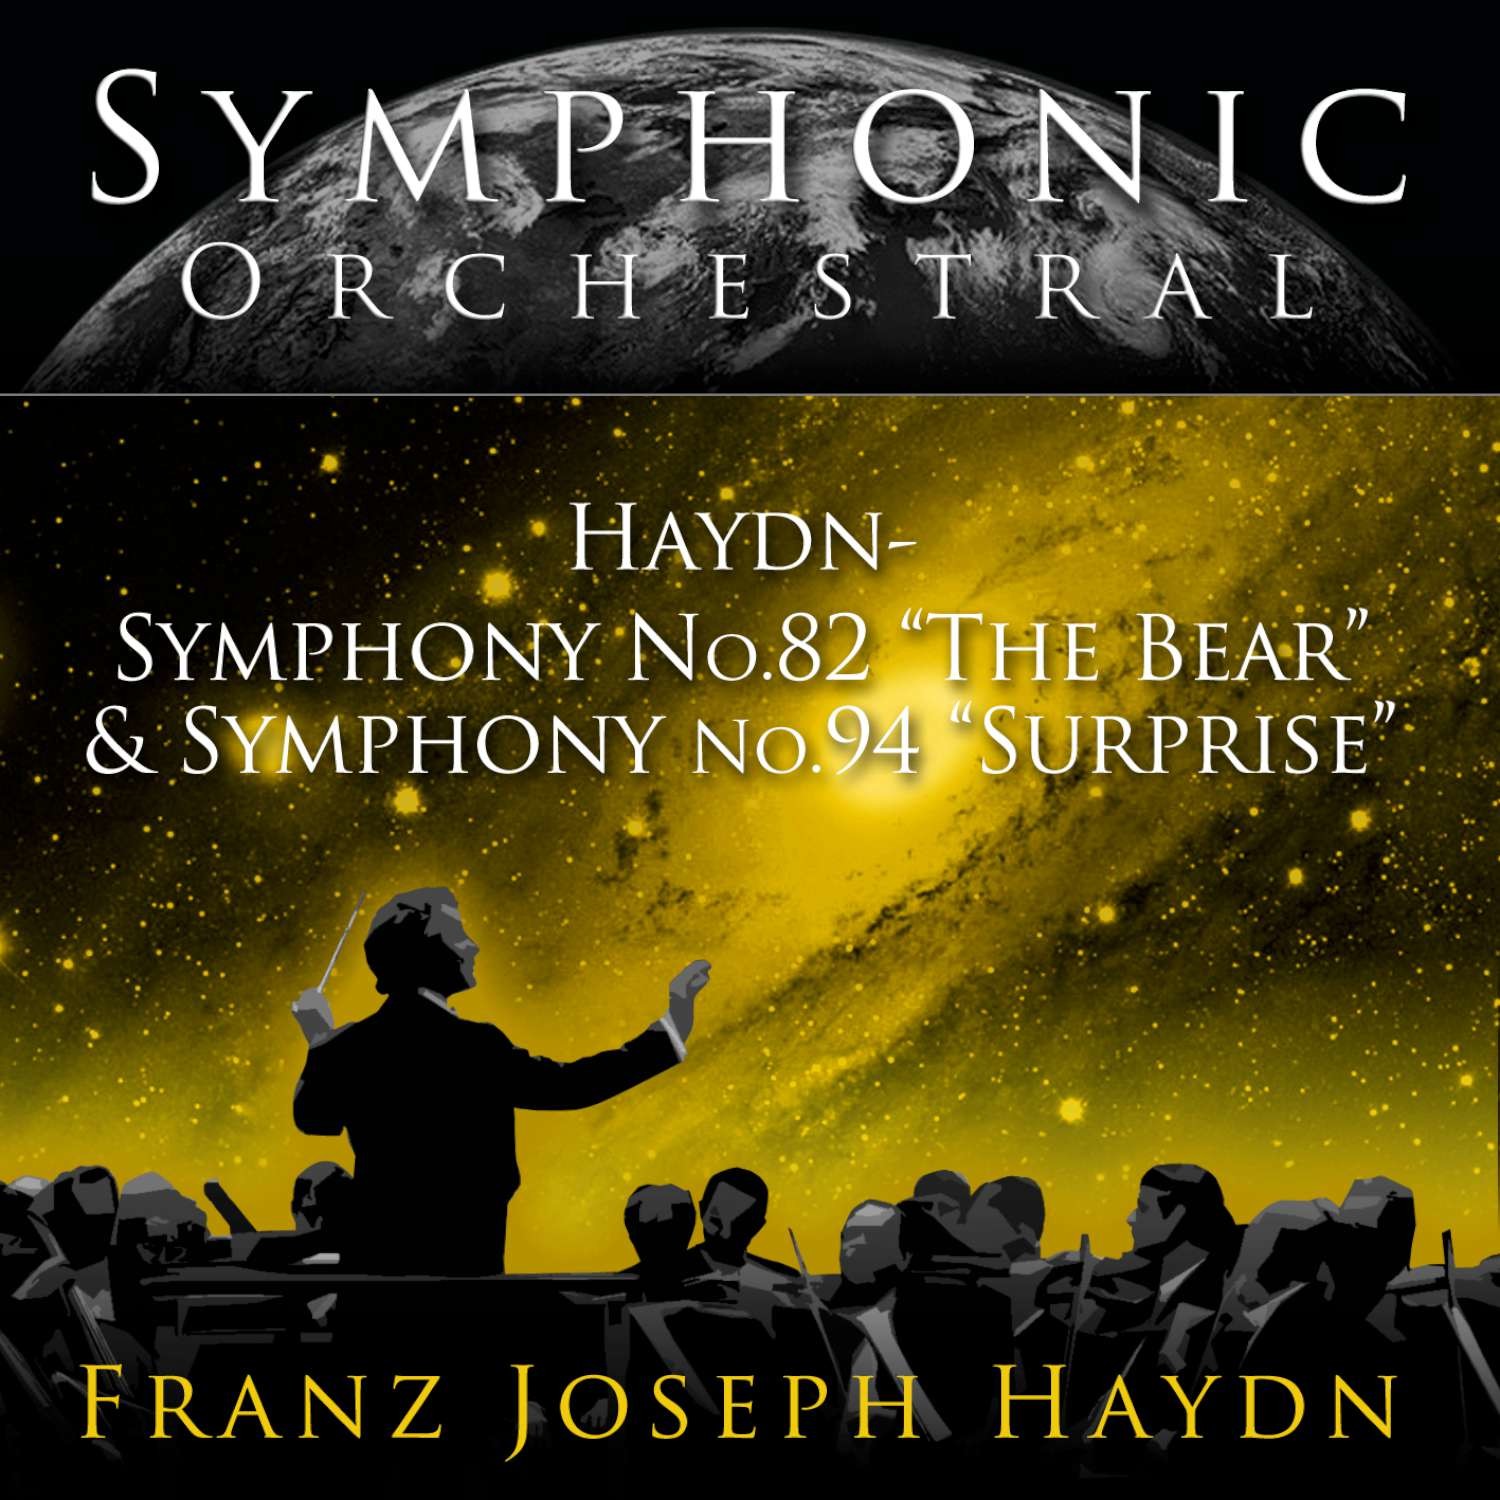 Haydn: Symphony #94 in G, H 1/94, "Surprise" - 2. Andante